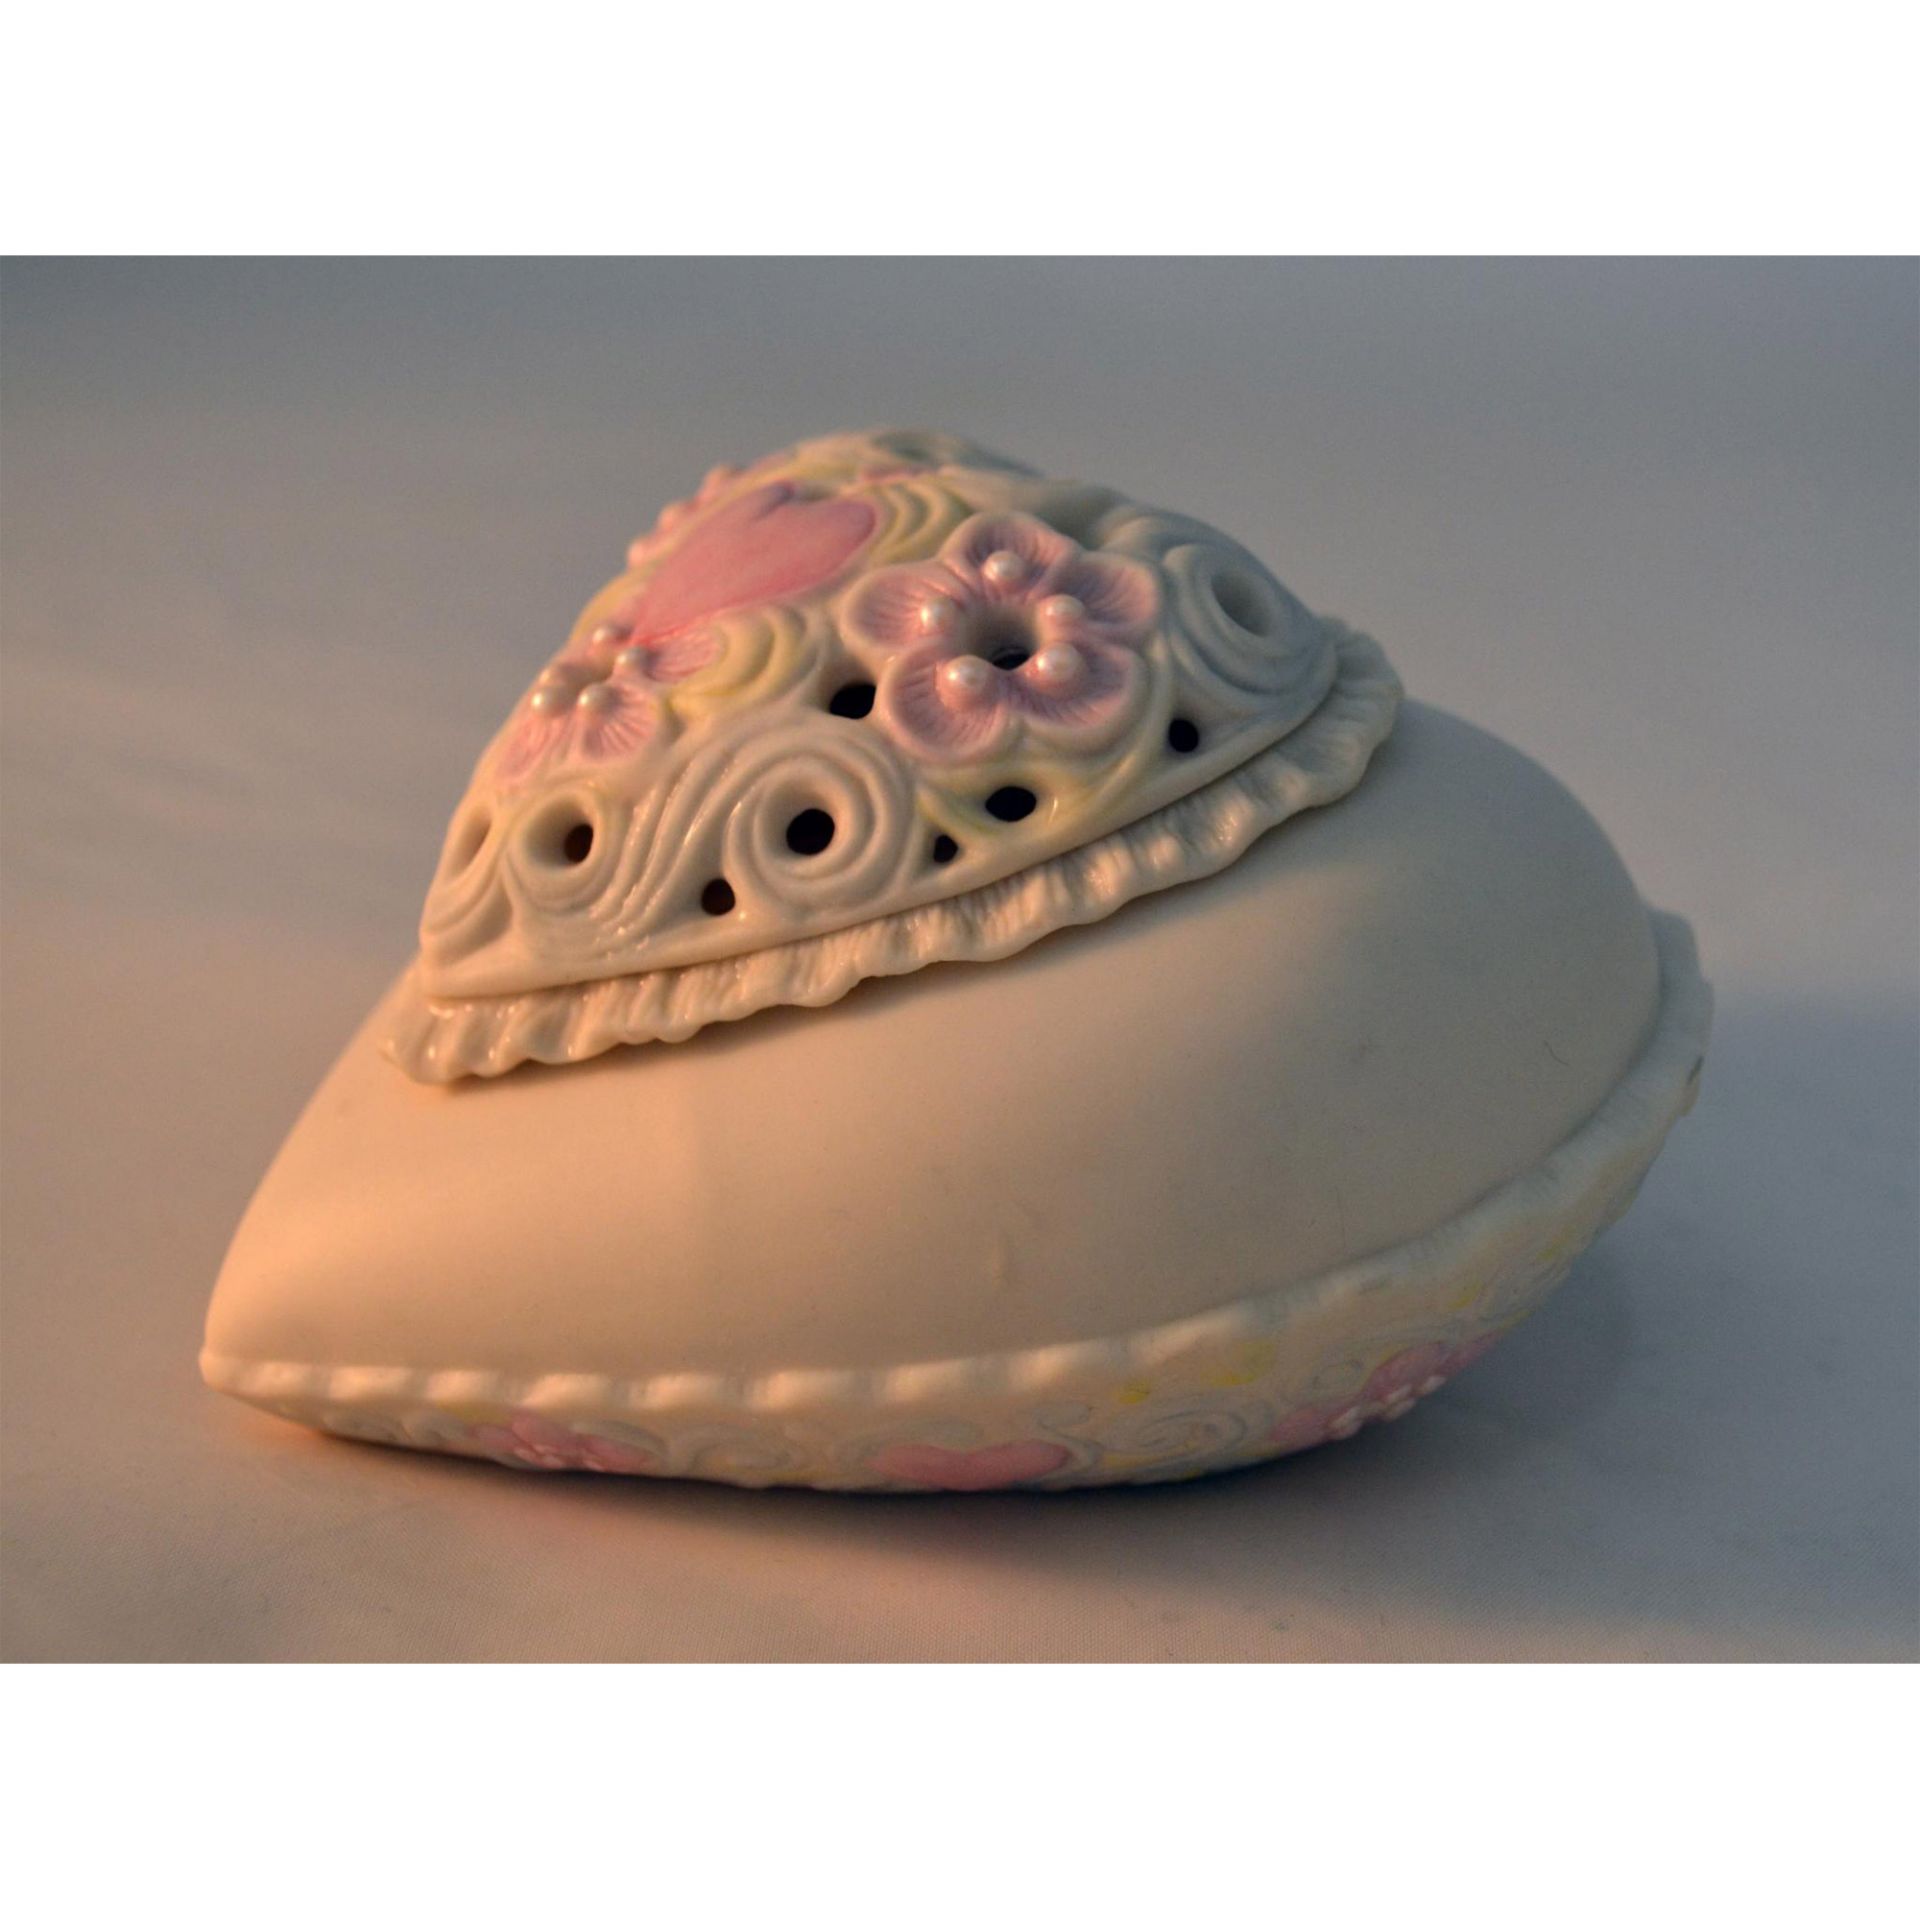 Cybis Porcelain Pastel Lidded Heart Box, Thinking Of You - Image 3 of 6